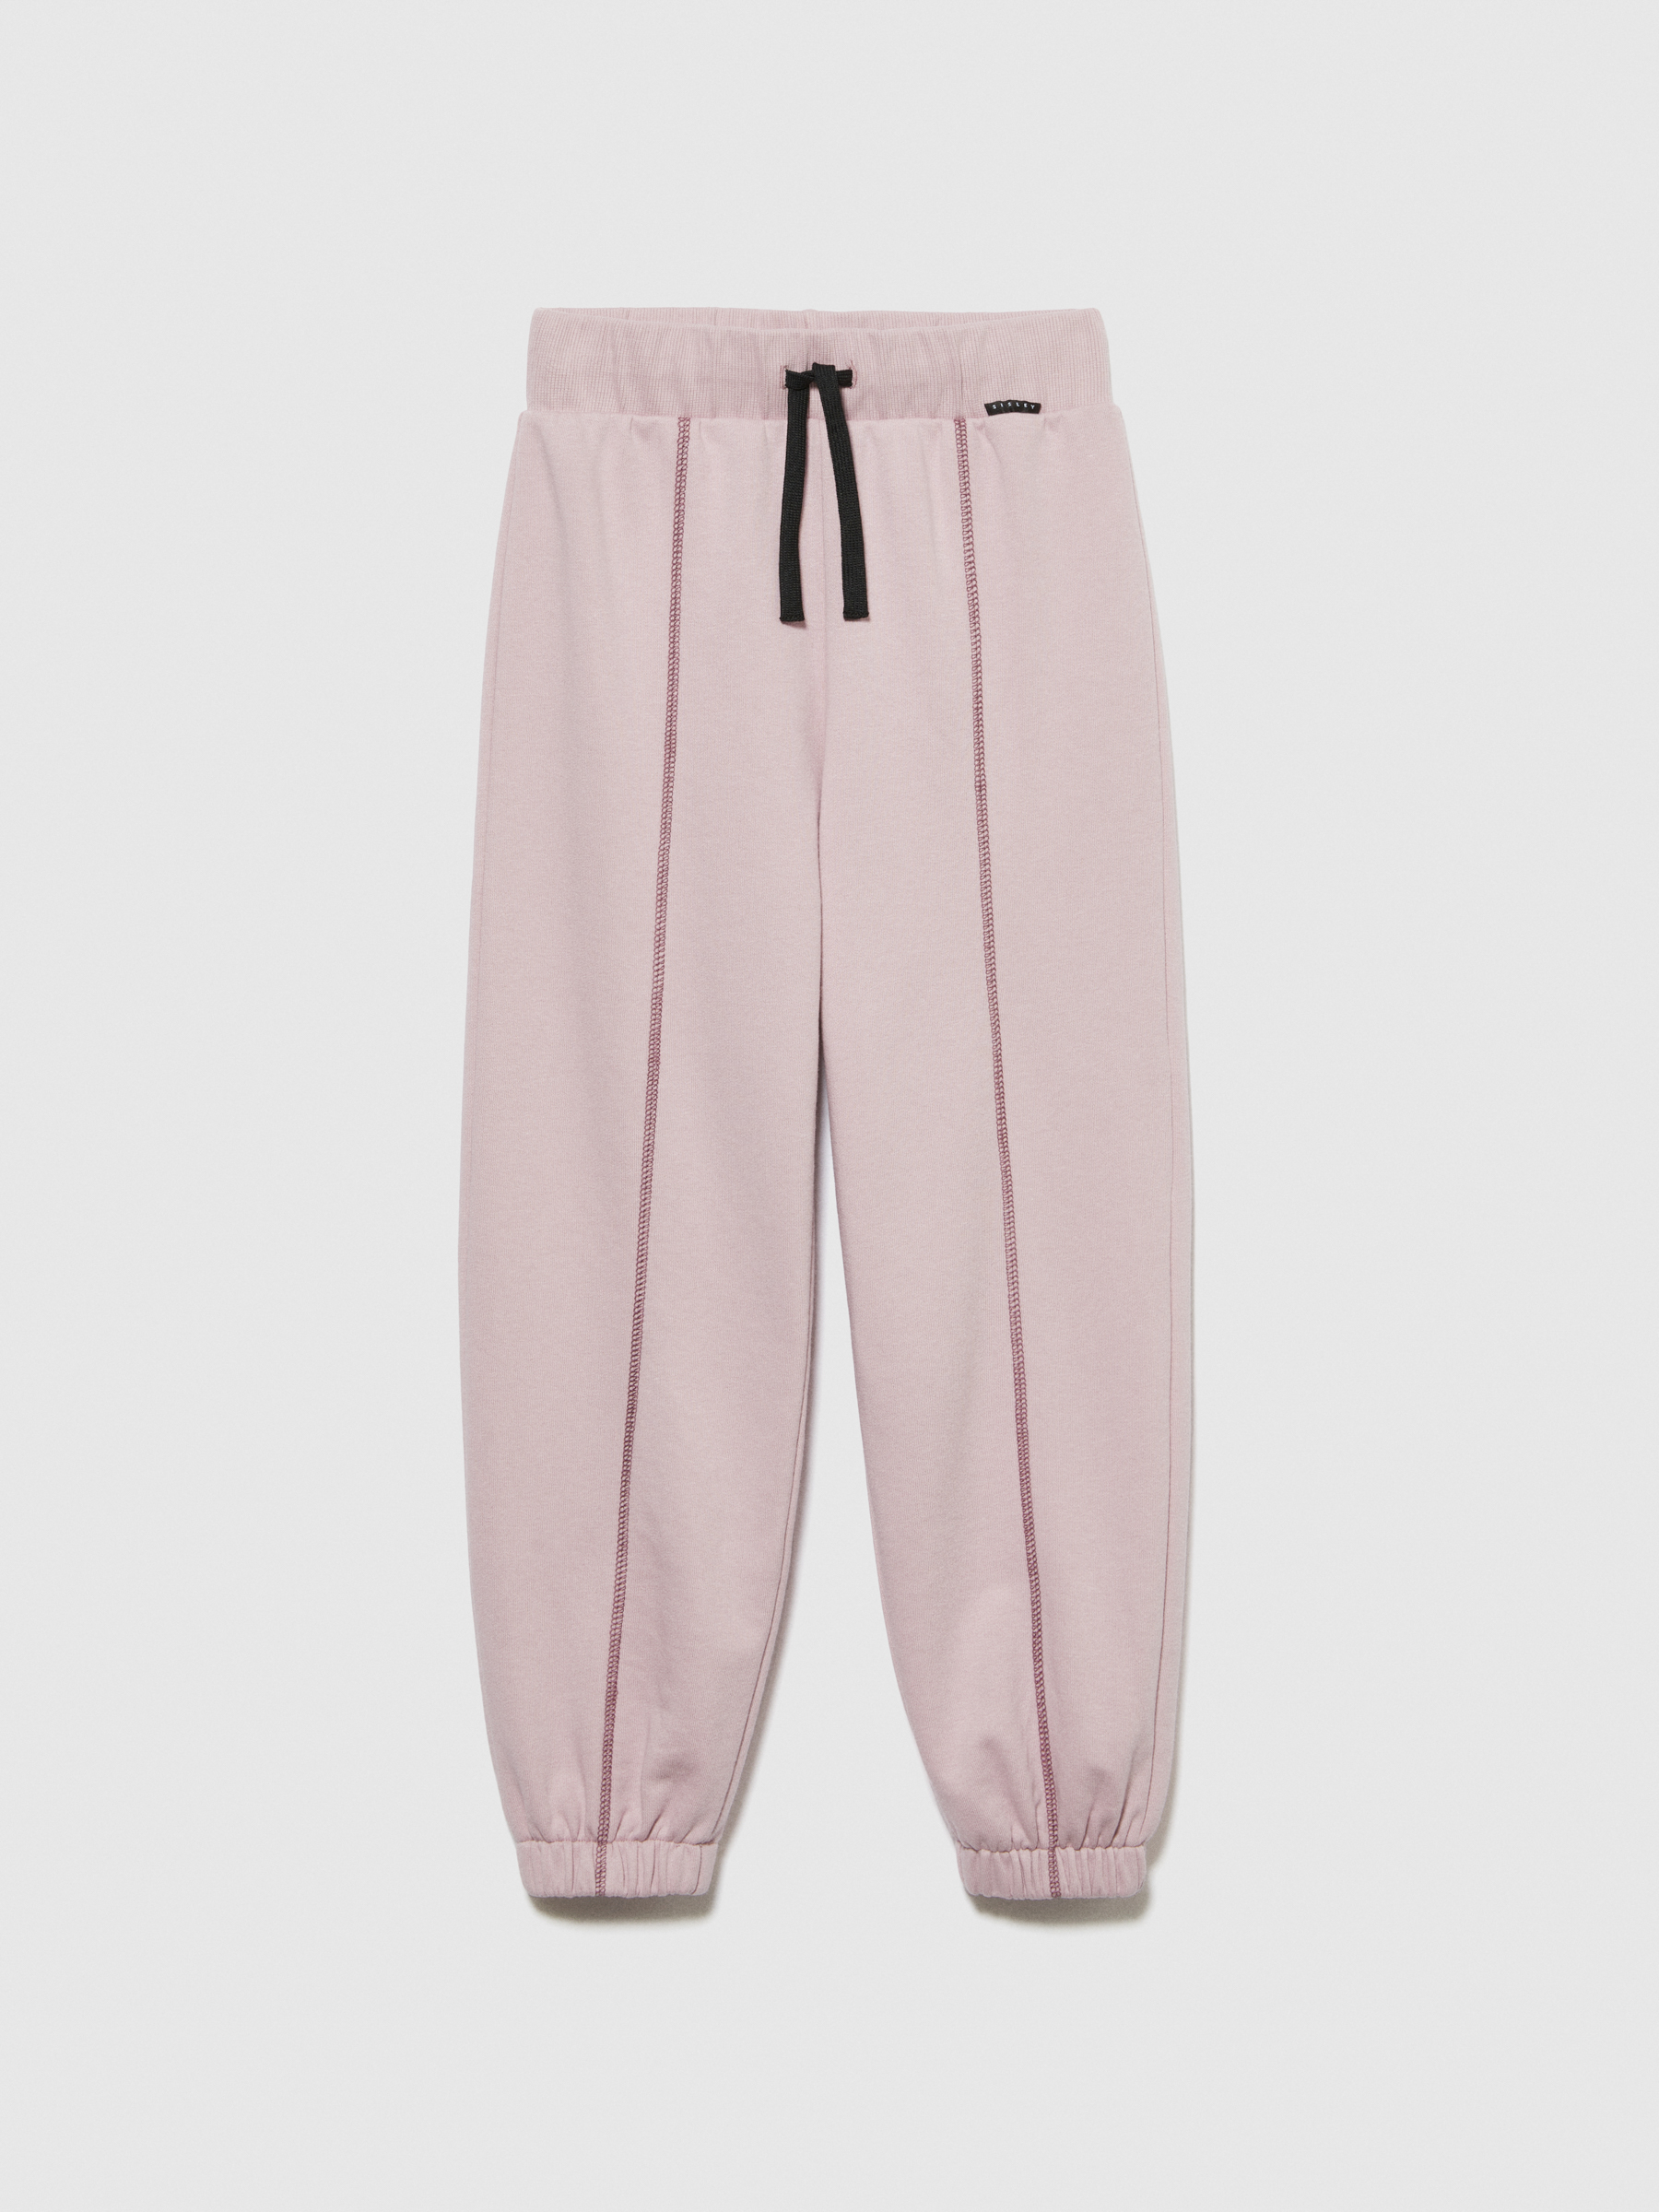 Sisley Young - Oversized Fit Joggers, Woman, Pink, Size: XL